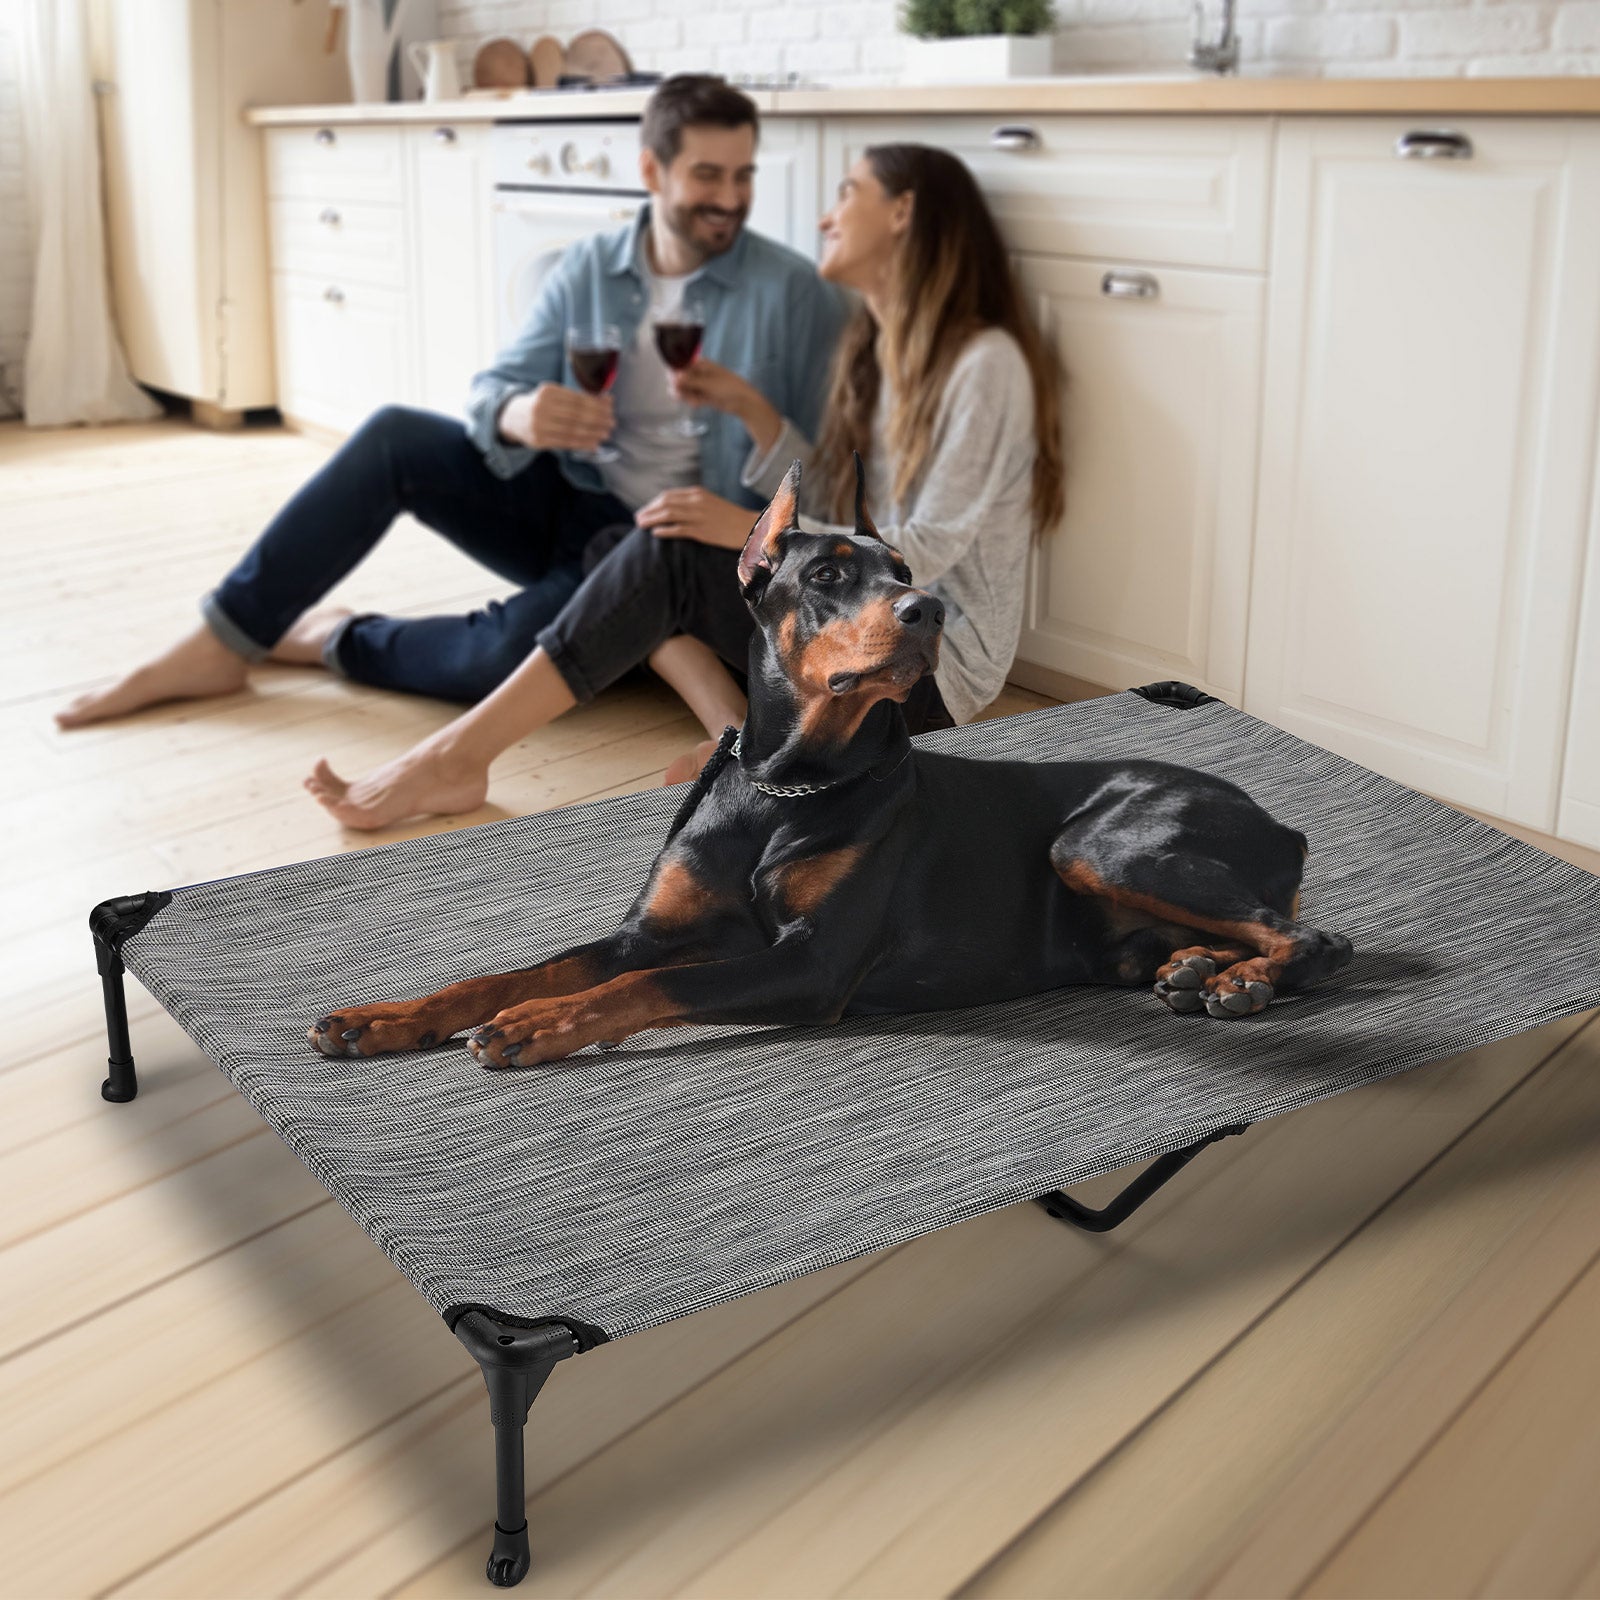 Veehoo Cooling Elevated Dog Bed， Portable Raised Pet Cot with Washable Mesh， XX-Large， Black Silver